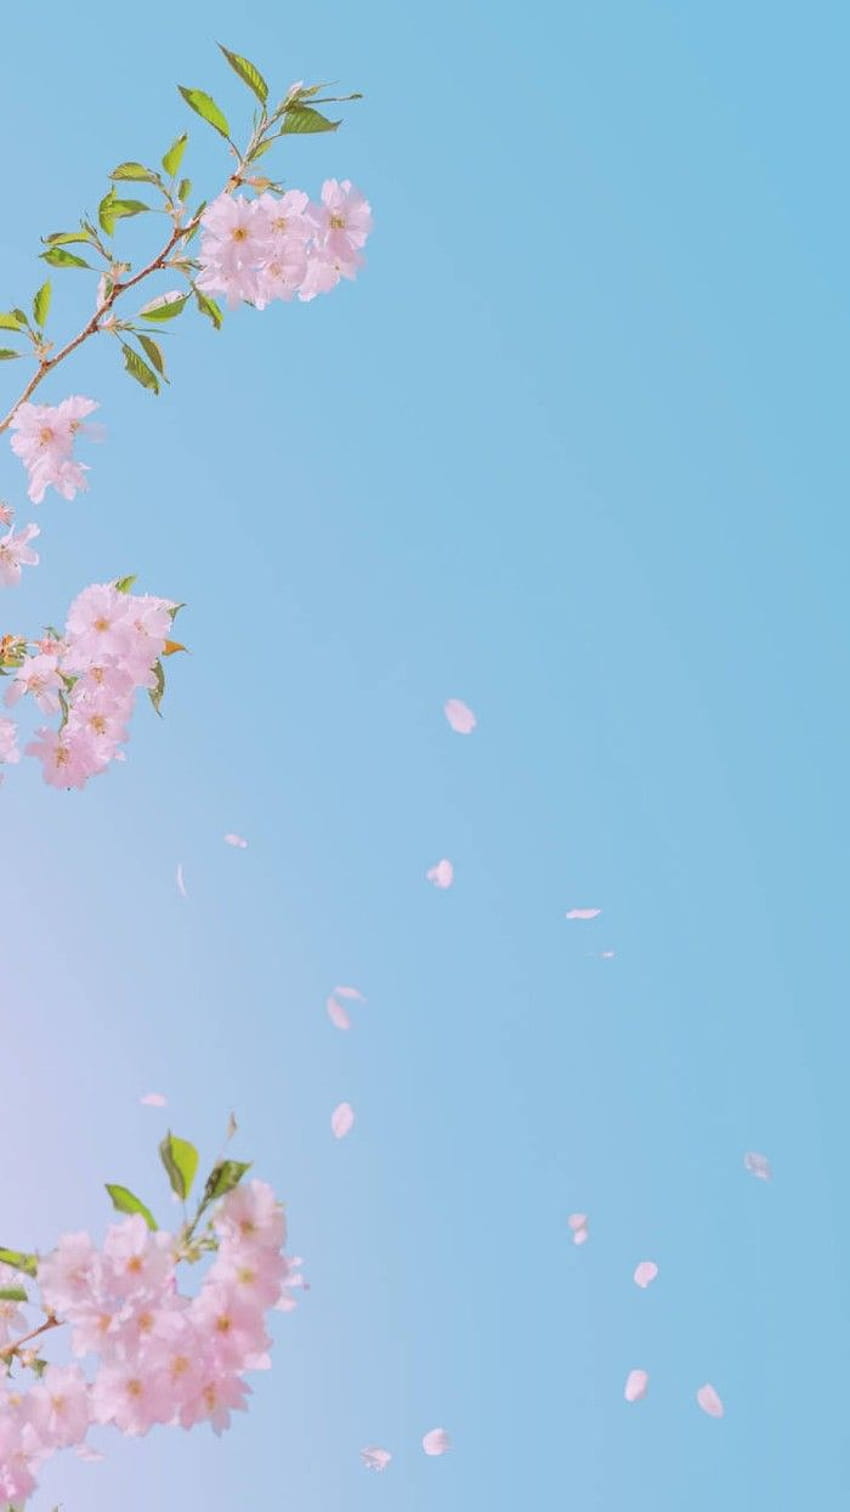 Pin by Mila on Background Flowers photography wallpaper Anime scenery  wallpaper Landscape wallpaper trong 2022 K o Nht k ngh thut nh n tng  Wallpaper Download  MOONAZ